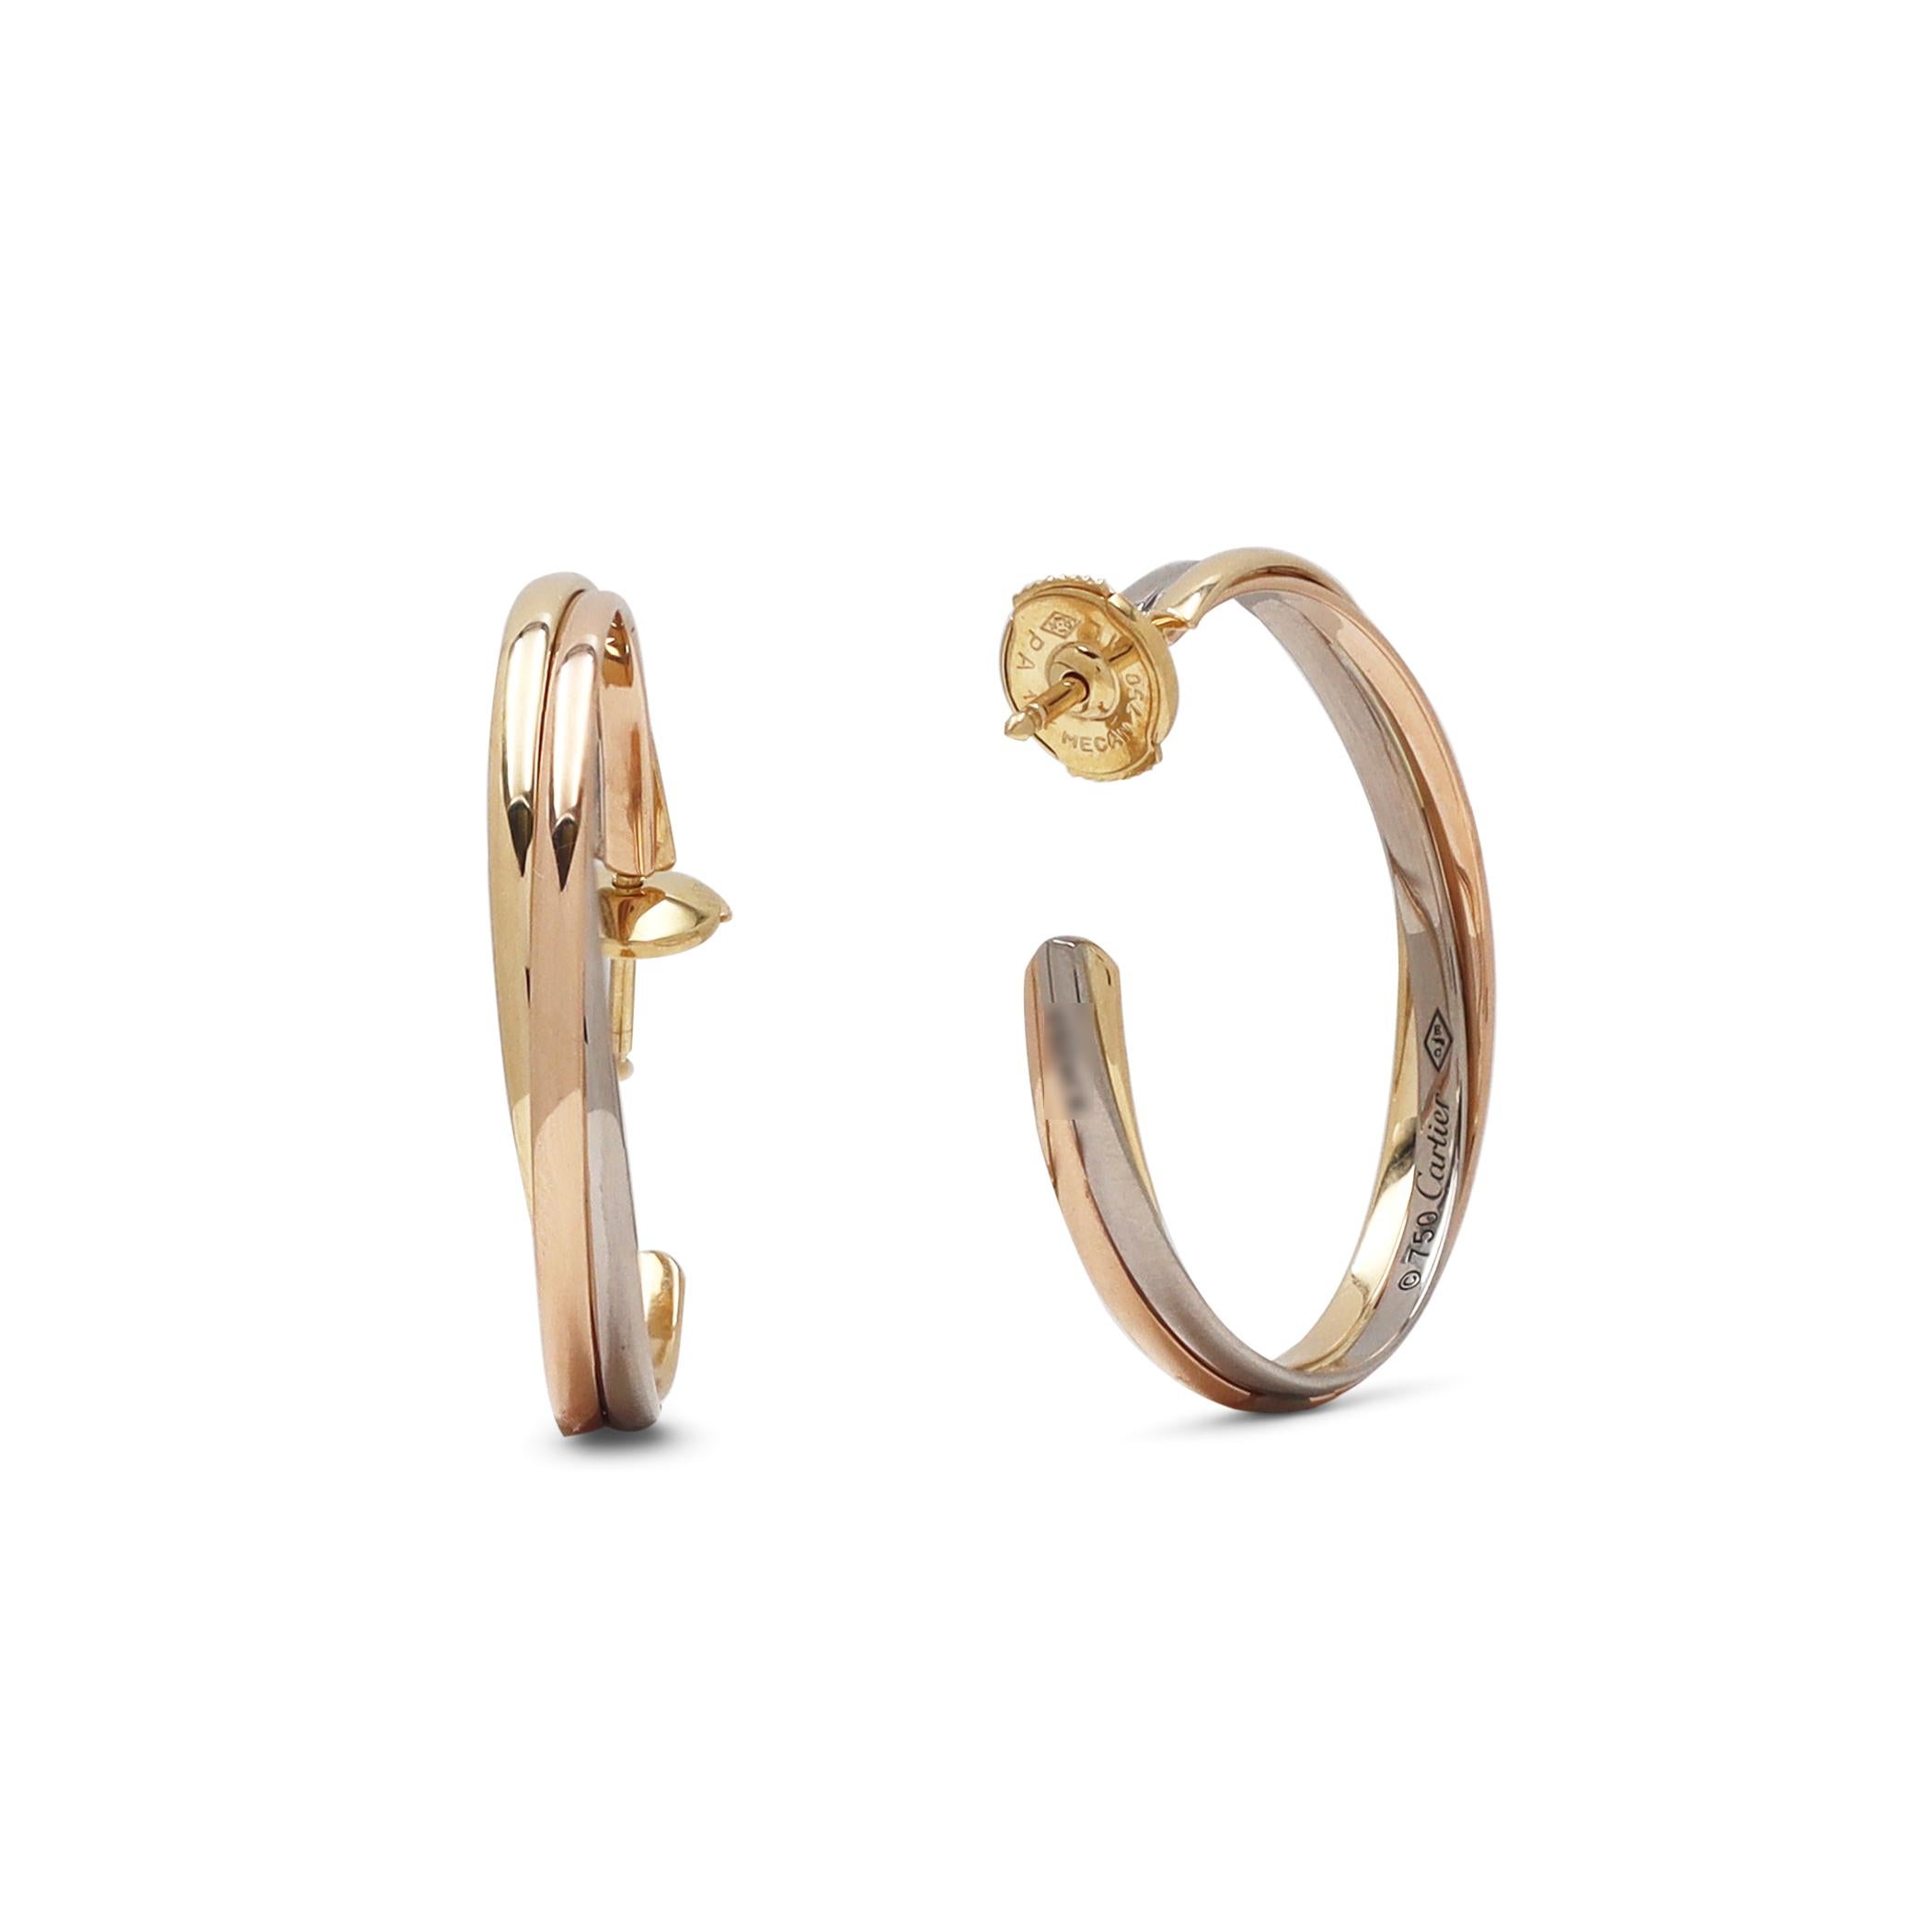 Authentic Cartier 'Trinity' hoop earrings are comprised of interlocking bands of 18 karat yellow, rose, and white gold. The earrings measure 30mm (1.2 inches) in length. Signed Cartier, 750, with serial number and hallmarks. The earrings are